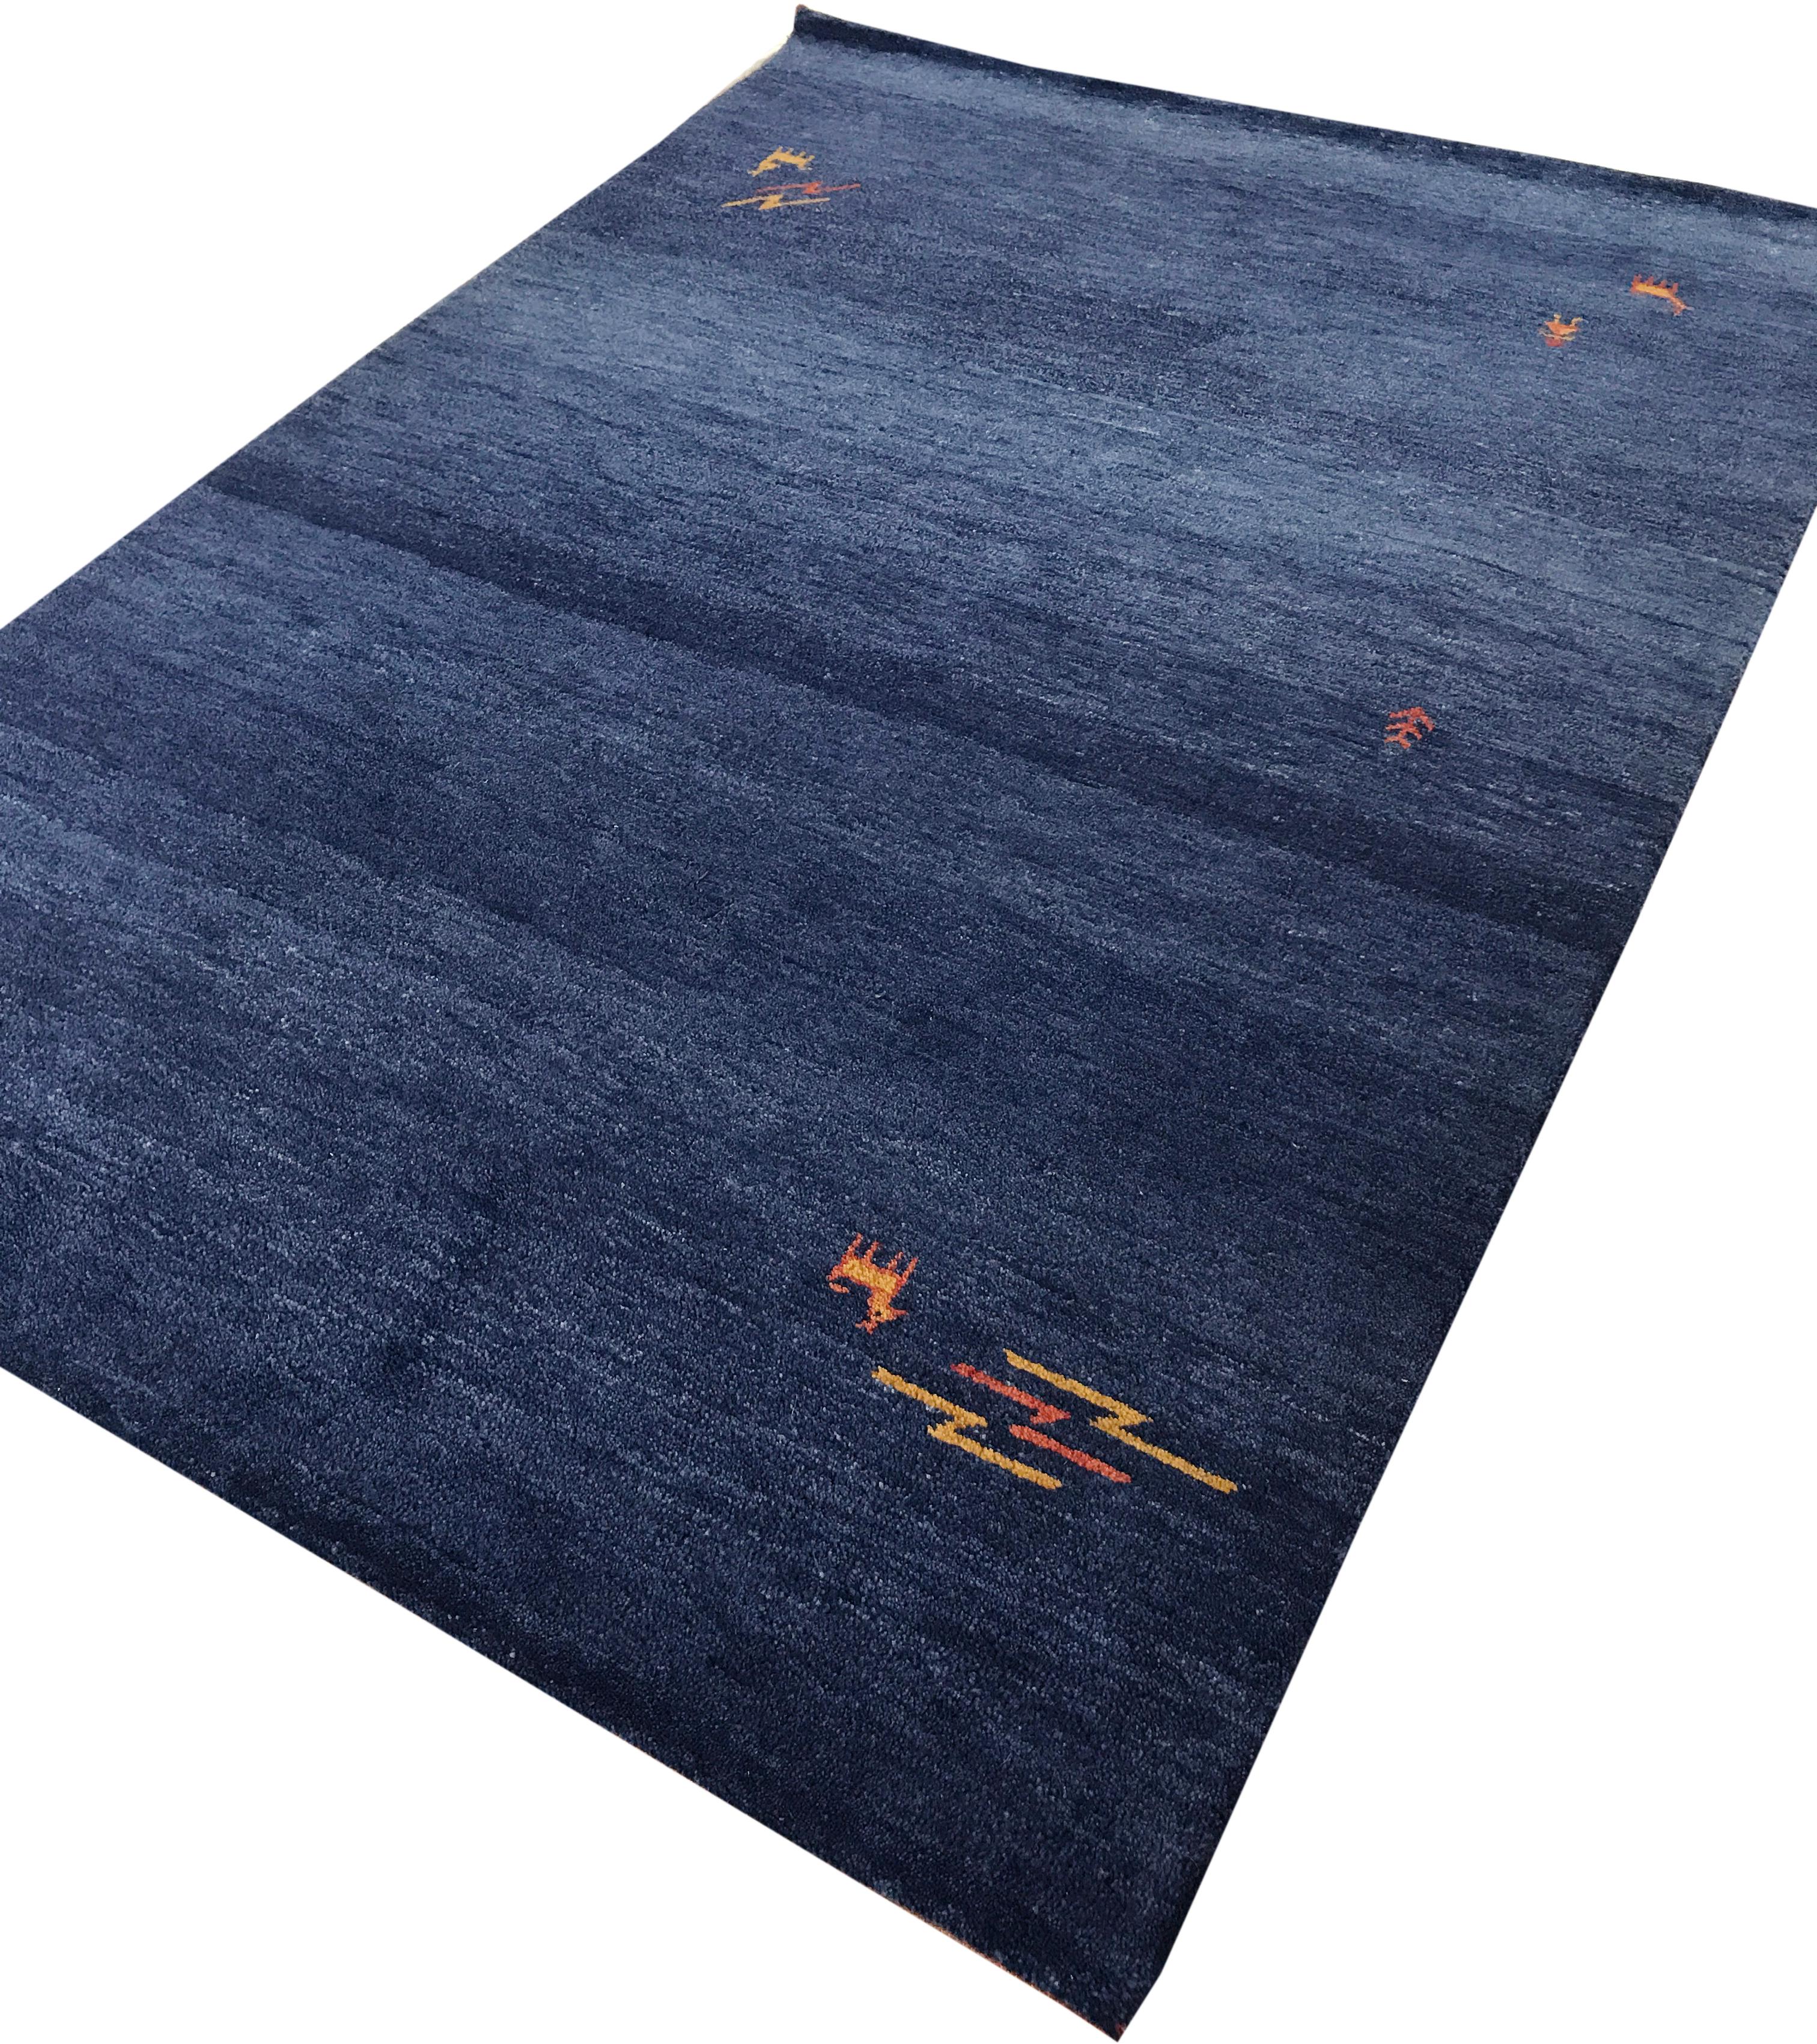 Indian Dark Blue Wool Gabbeh Style Area Rug with Tribal Elements